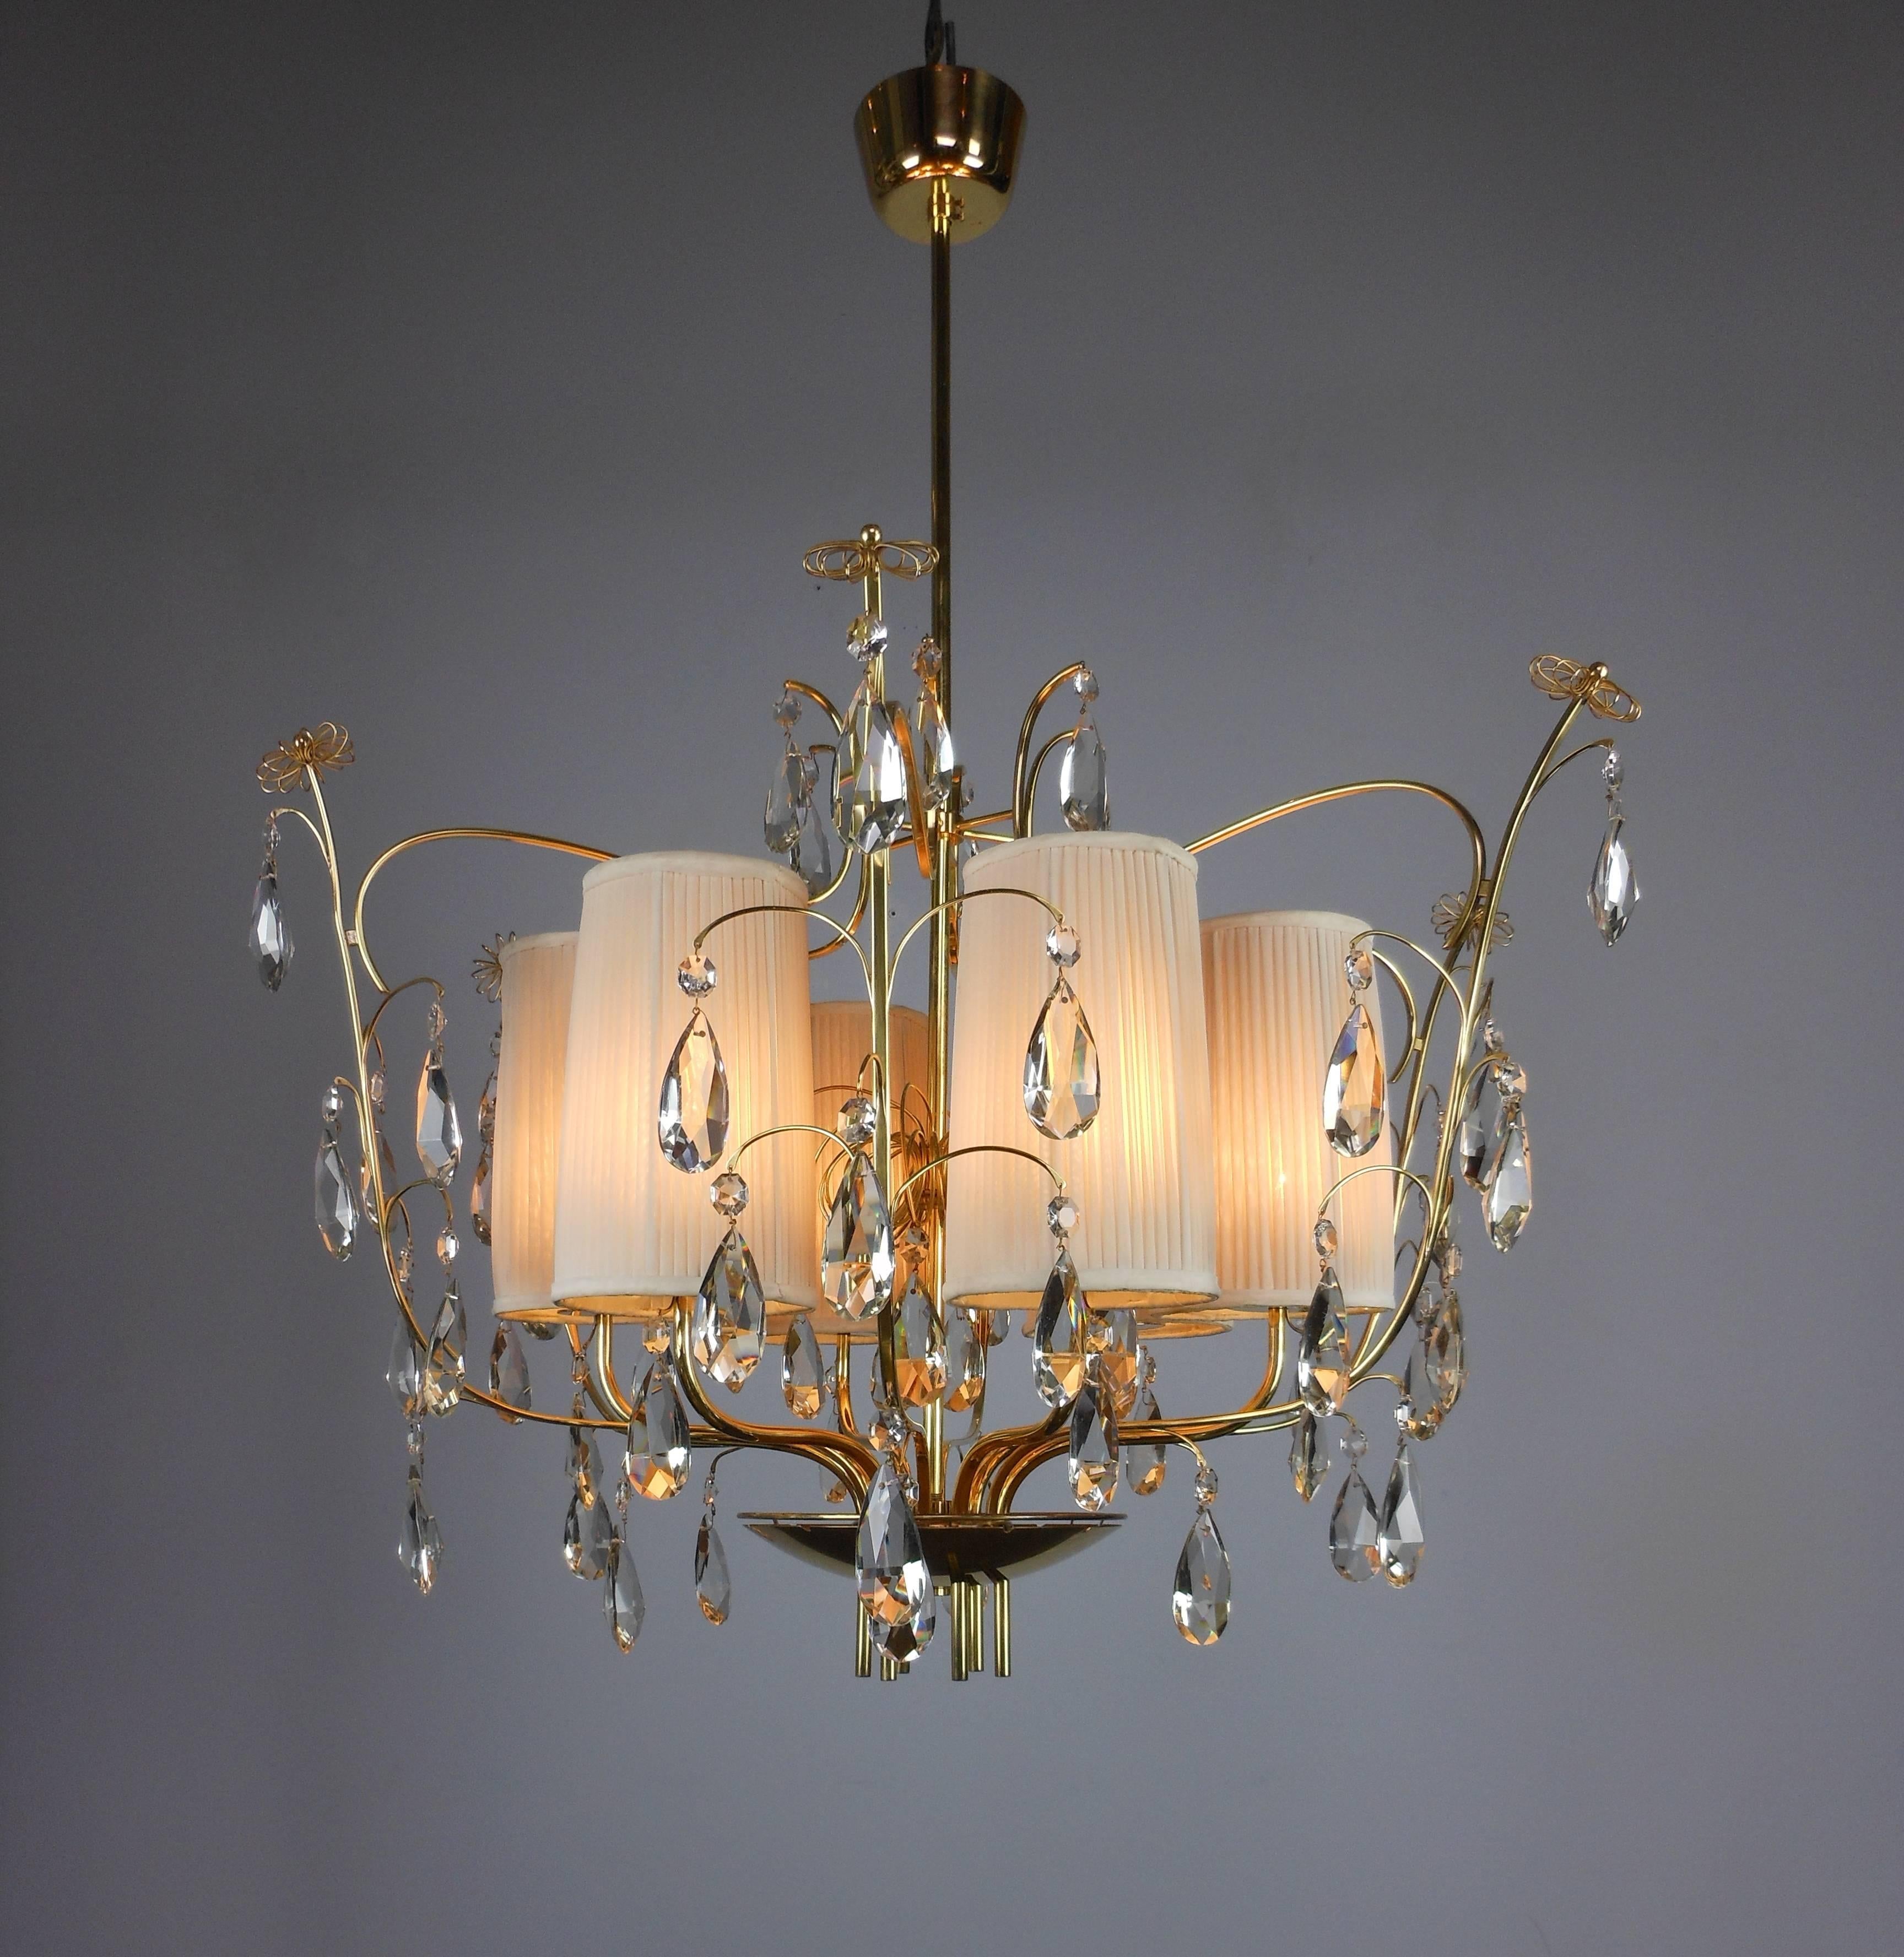 The circular domed canopy above the stem centered with a large spiral and a dish pierced with cylinders, the frame  of S-shape arms supporting lights alternating with bow form arms hung with teardrop crystals and ending in spirals.

Manufactured